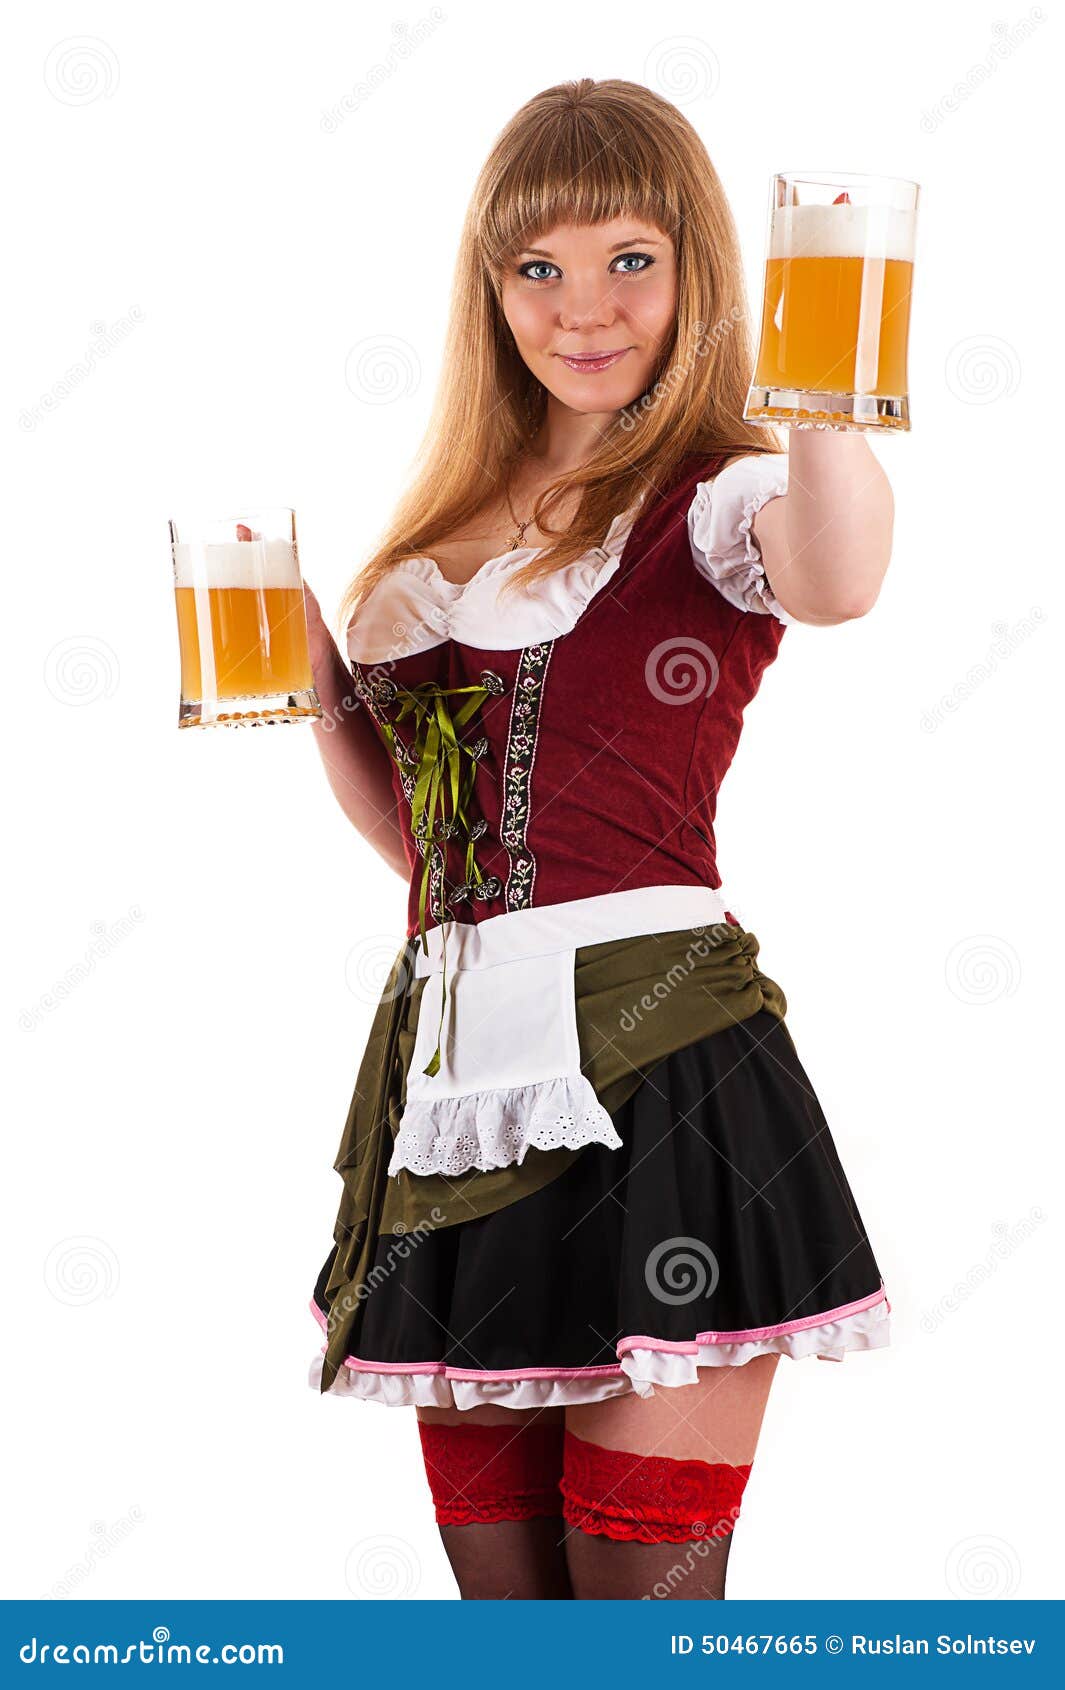 Oktoberfest Waitress with a Beer in Hand Stock Image - Image of ...